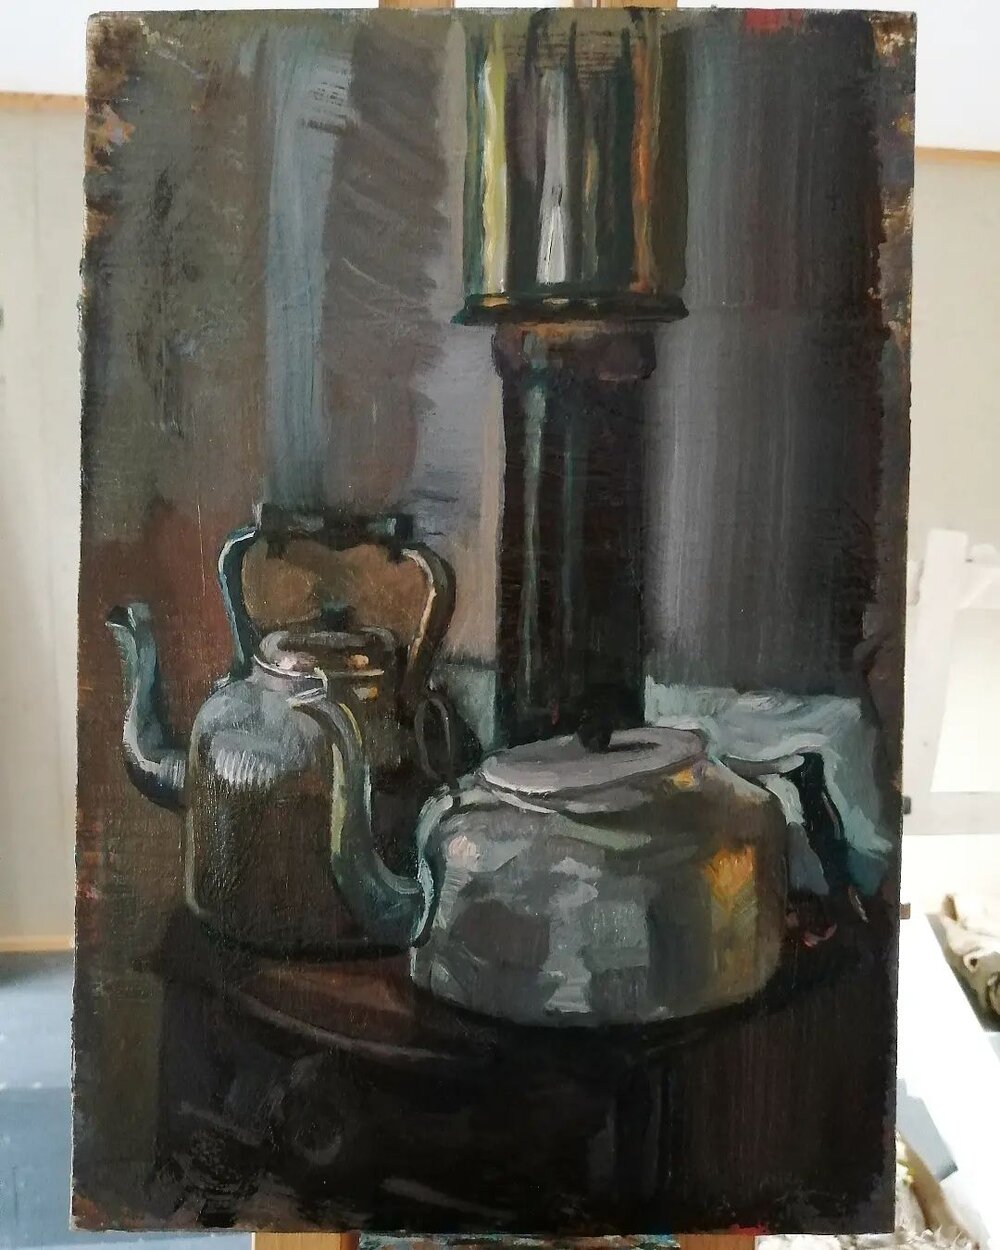 Ilay's kettles on the wood stove in his caravan. He used these for all hot water needs for many, many years. Alas he's been upgraded to an indoor tap just in time for his 80th birthday! @ilaycooper
#artoftheday
#paintingoninstagram
#royalsocietyofpor